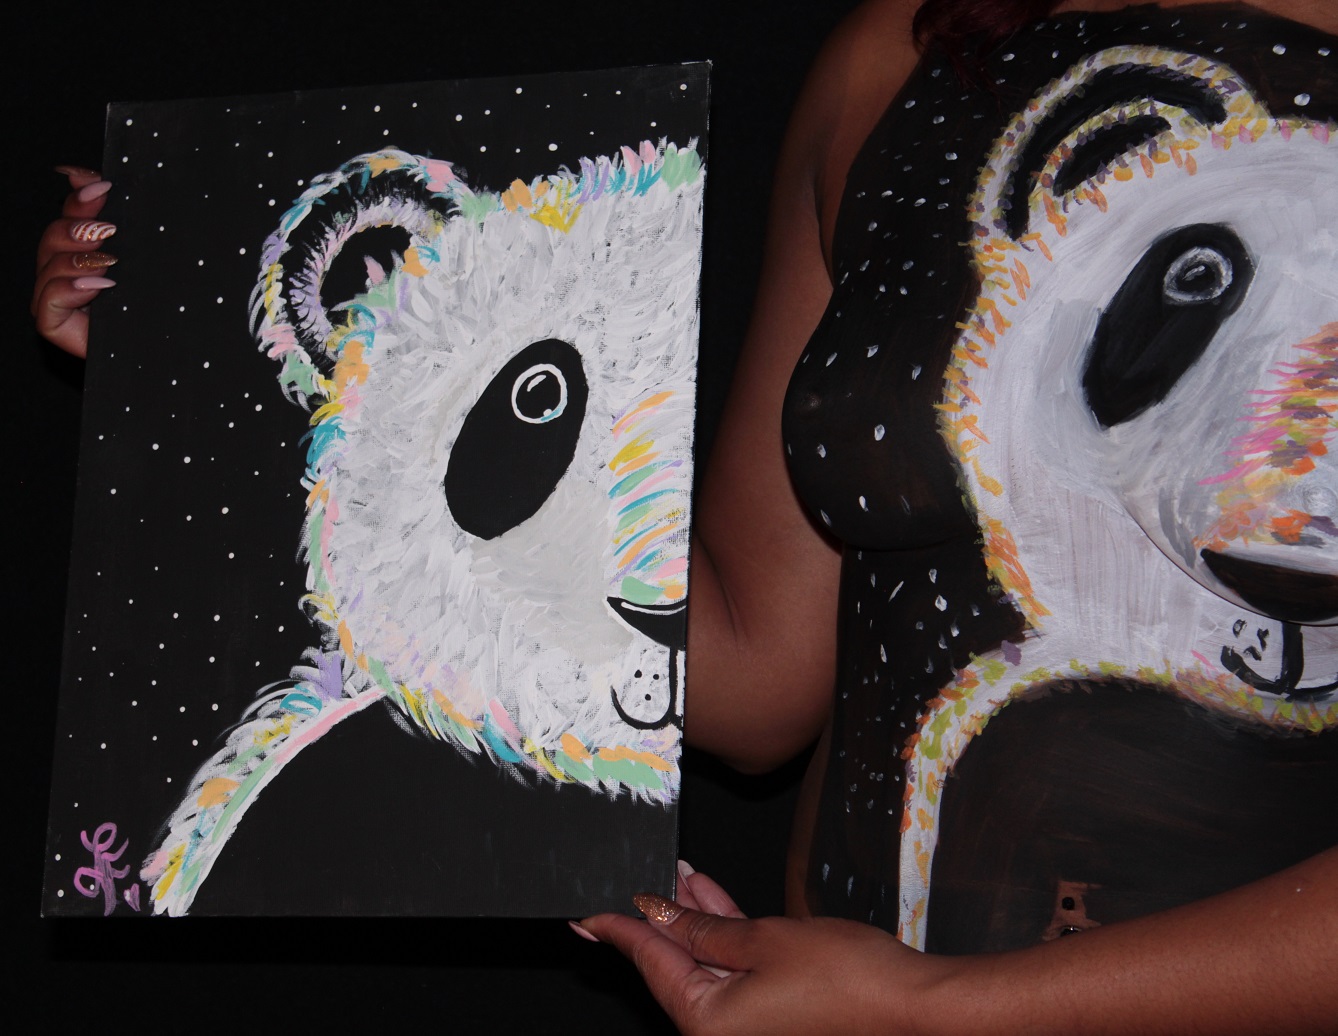 painting of panda on canvas next to copy on woman's torso